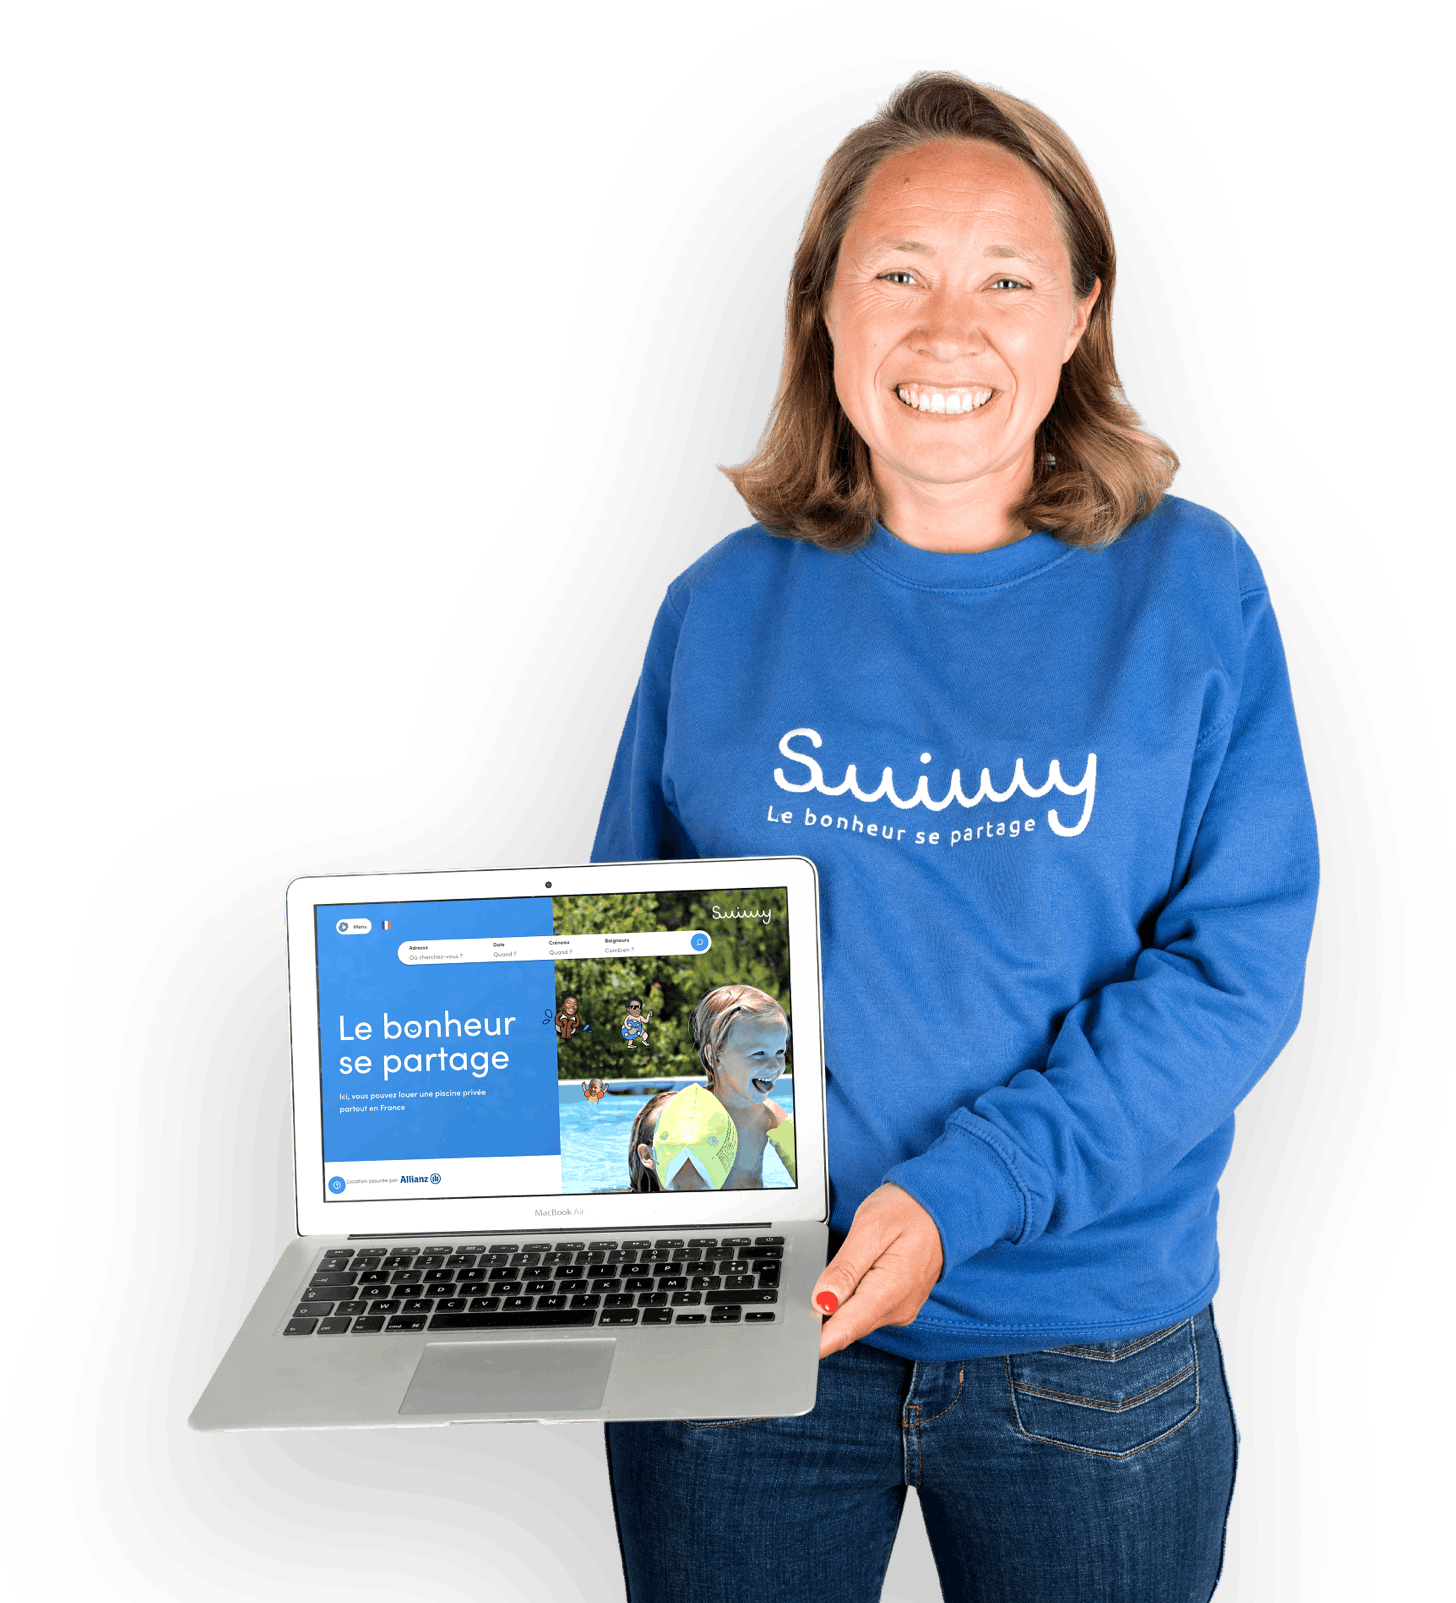 The marketplace Swimmy's founder Raphaëlle de Monteynard is smiling widely. She holds a laptop showing the Swimmy landing page facing the camera. 